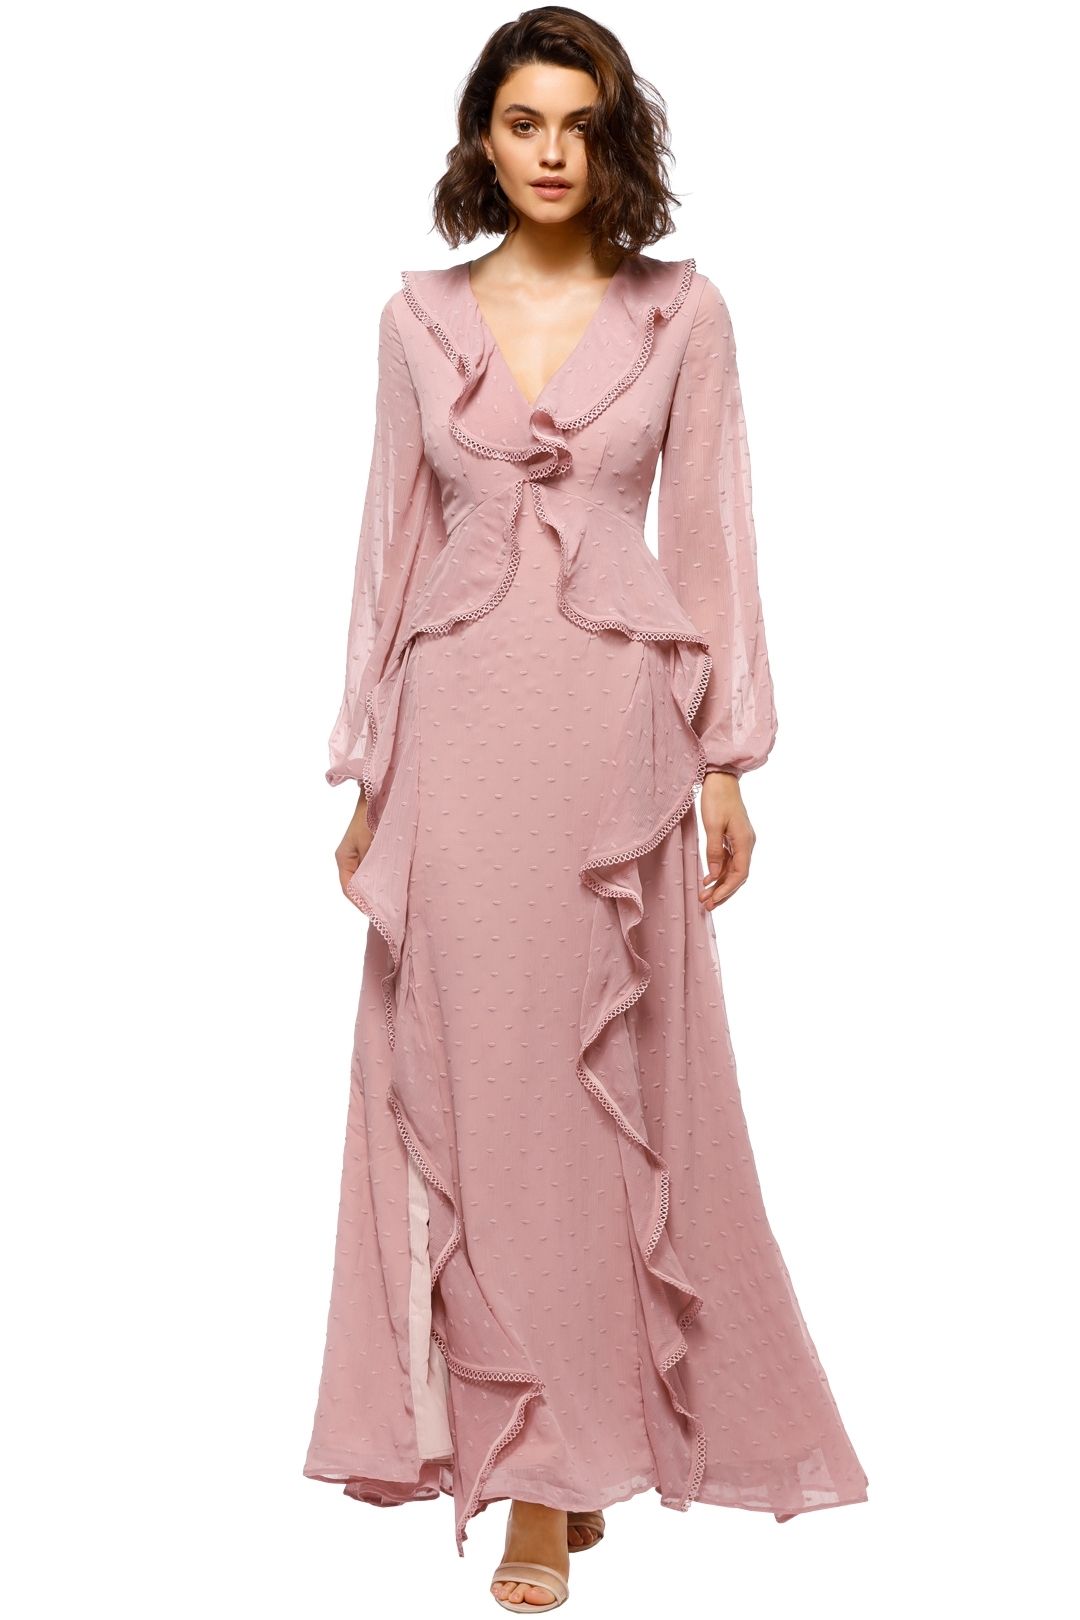 Keepsake the Label - Hideaway Gown - Pink - Front